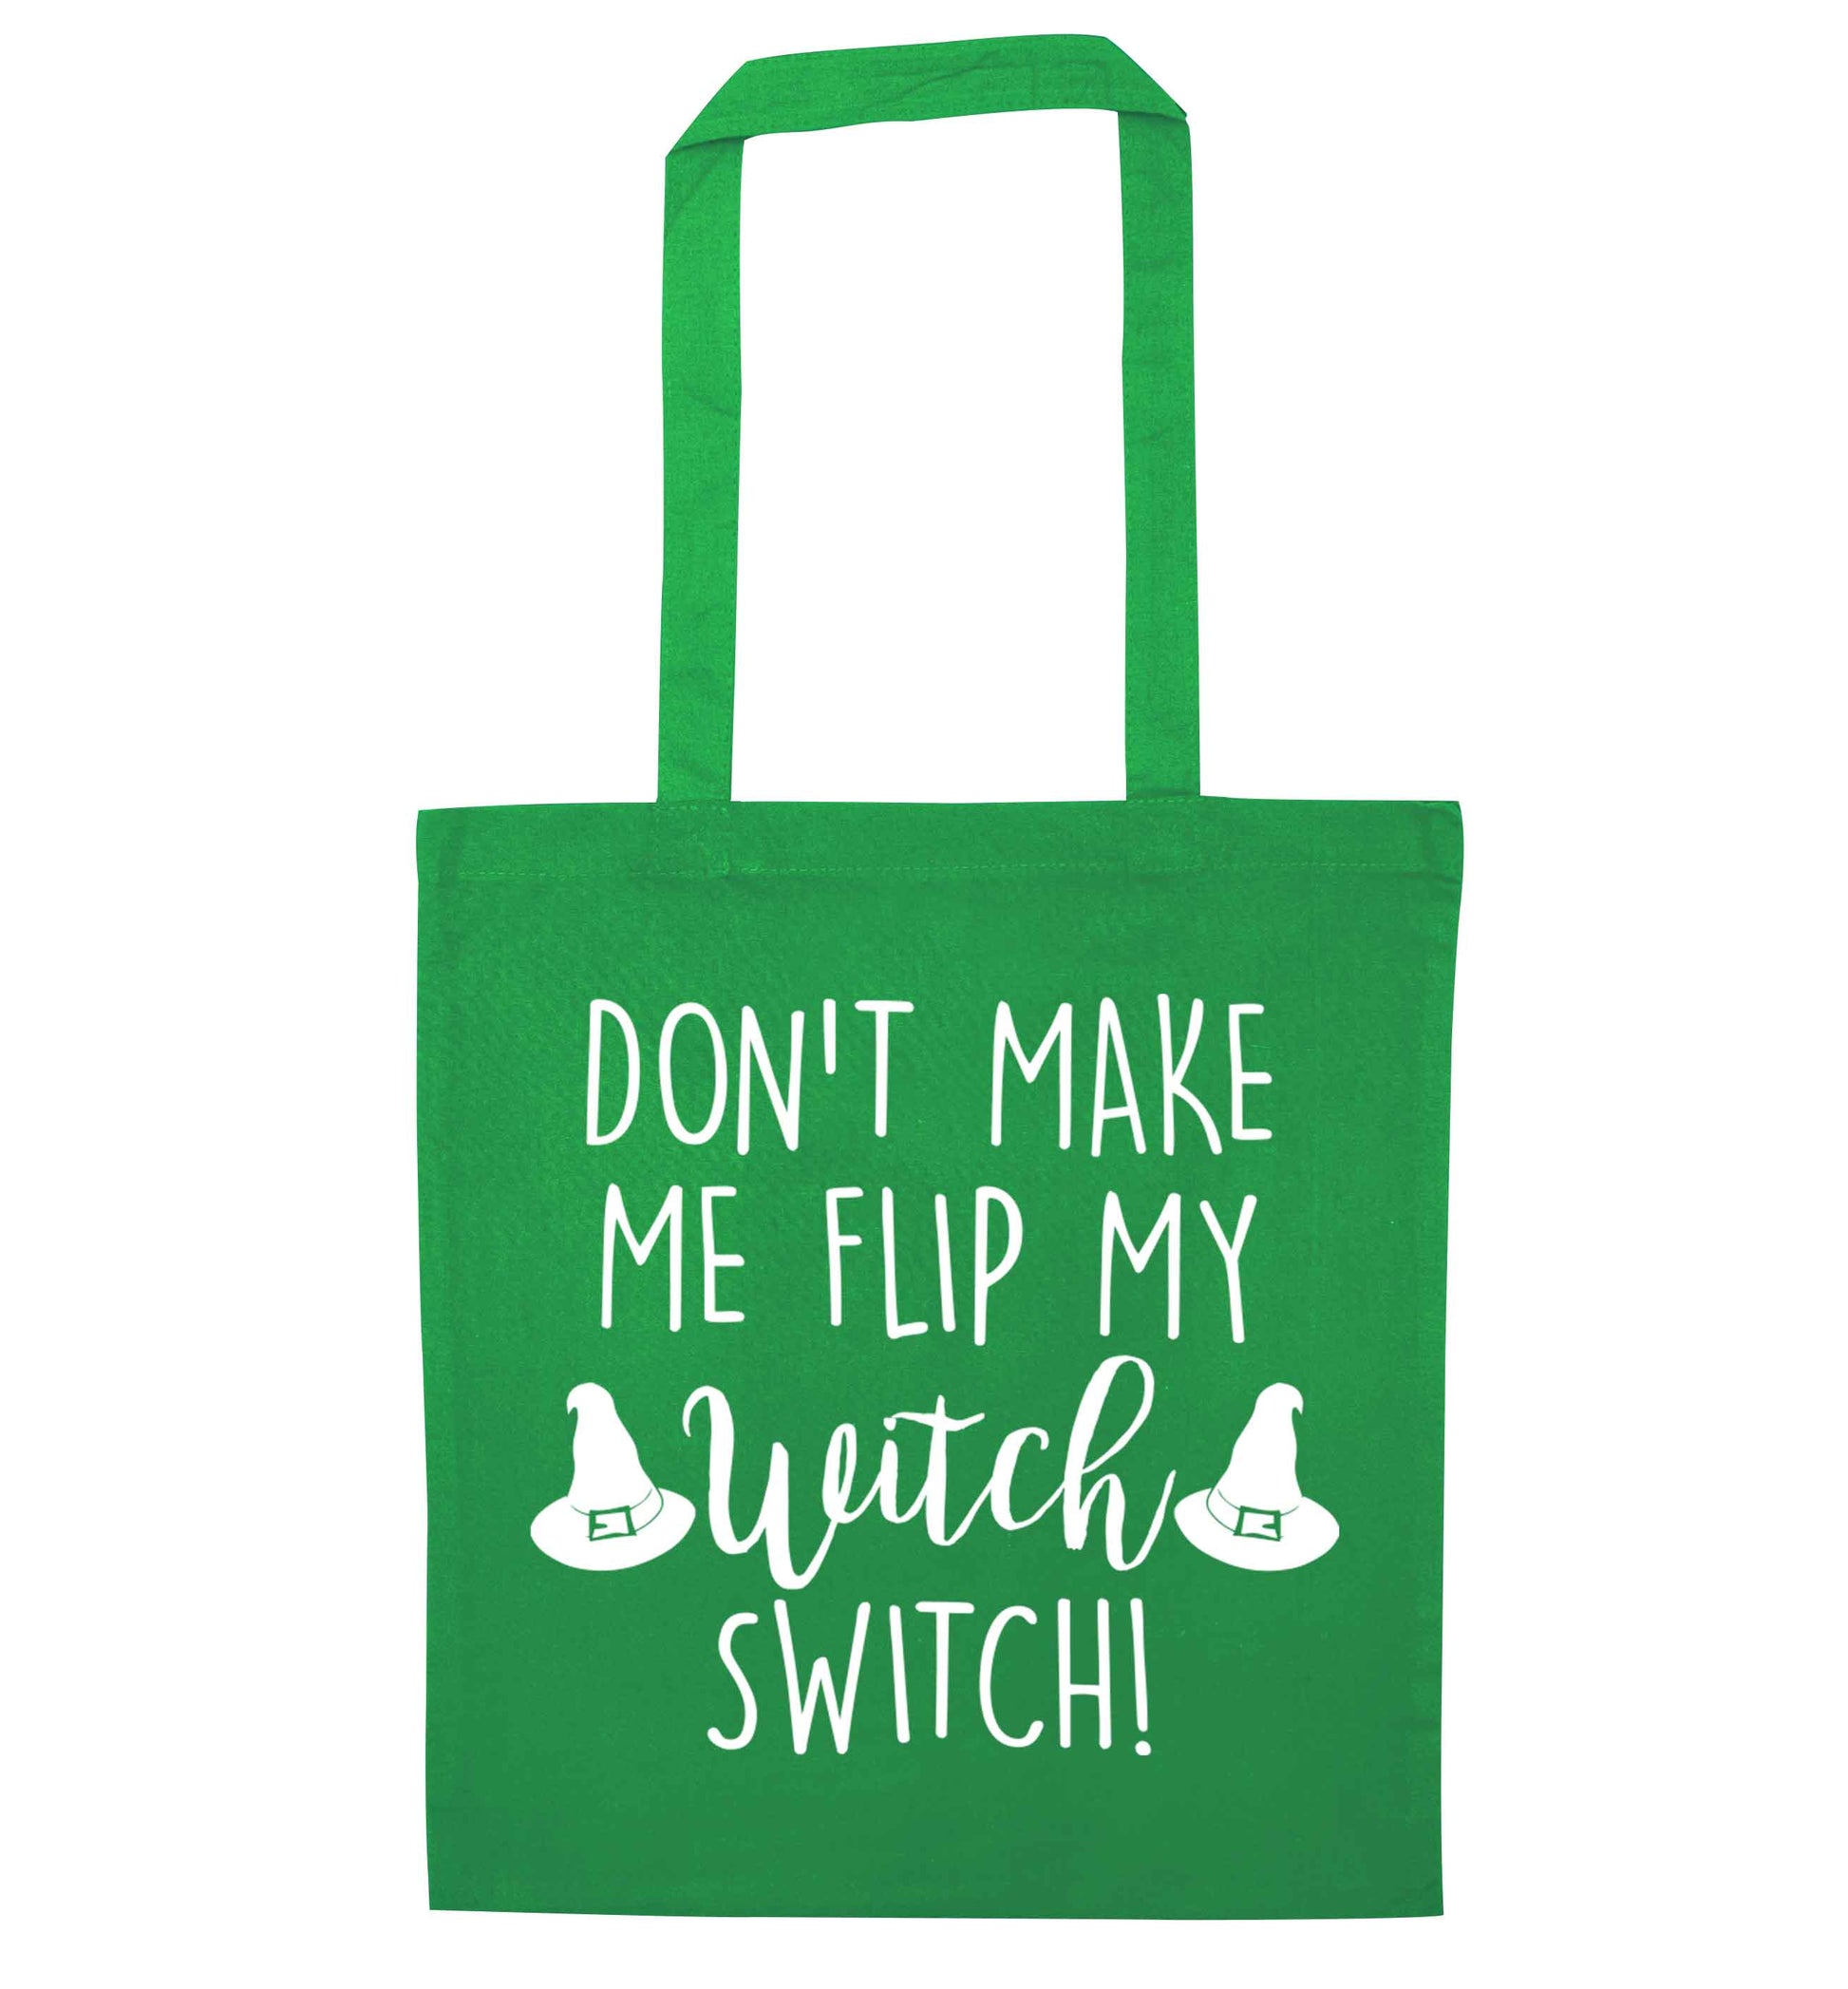 Don't make me flip my witch switch green tote bag